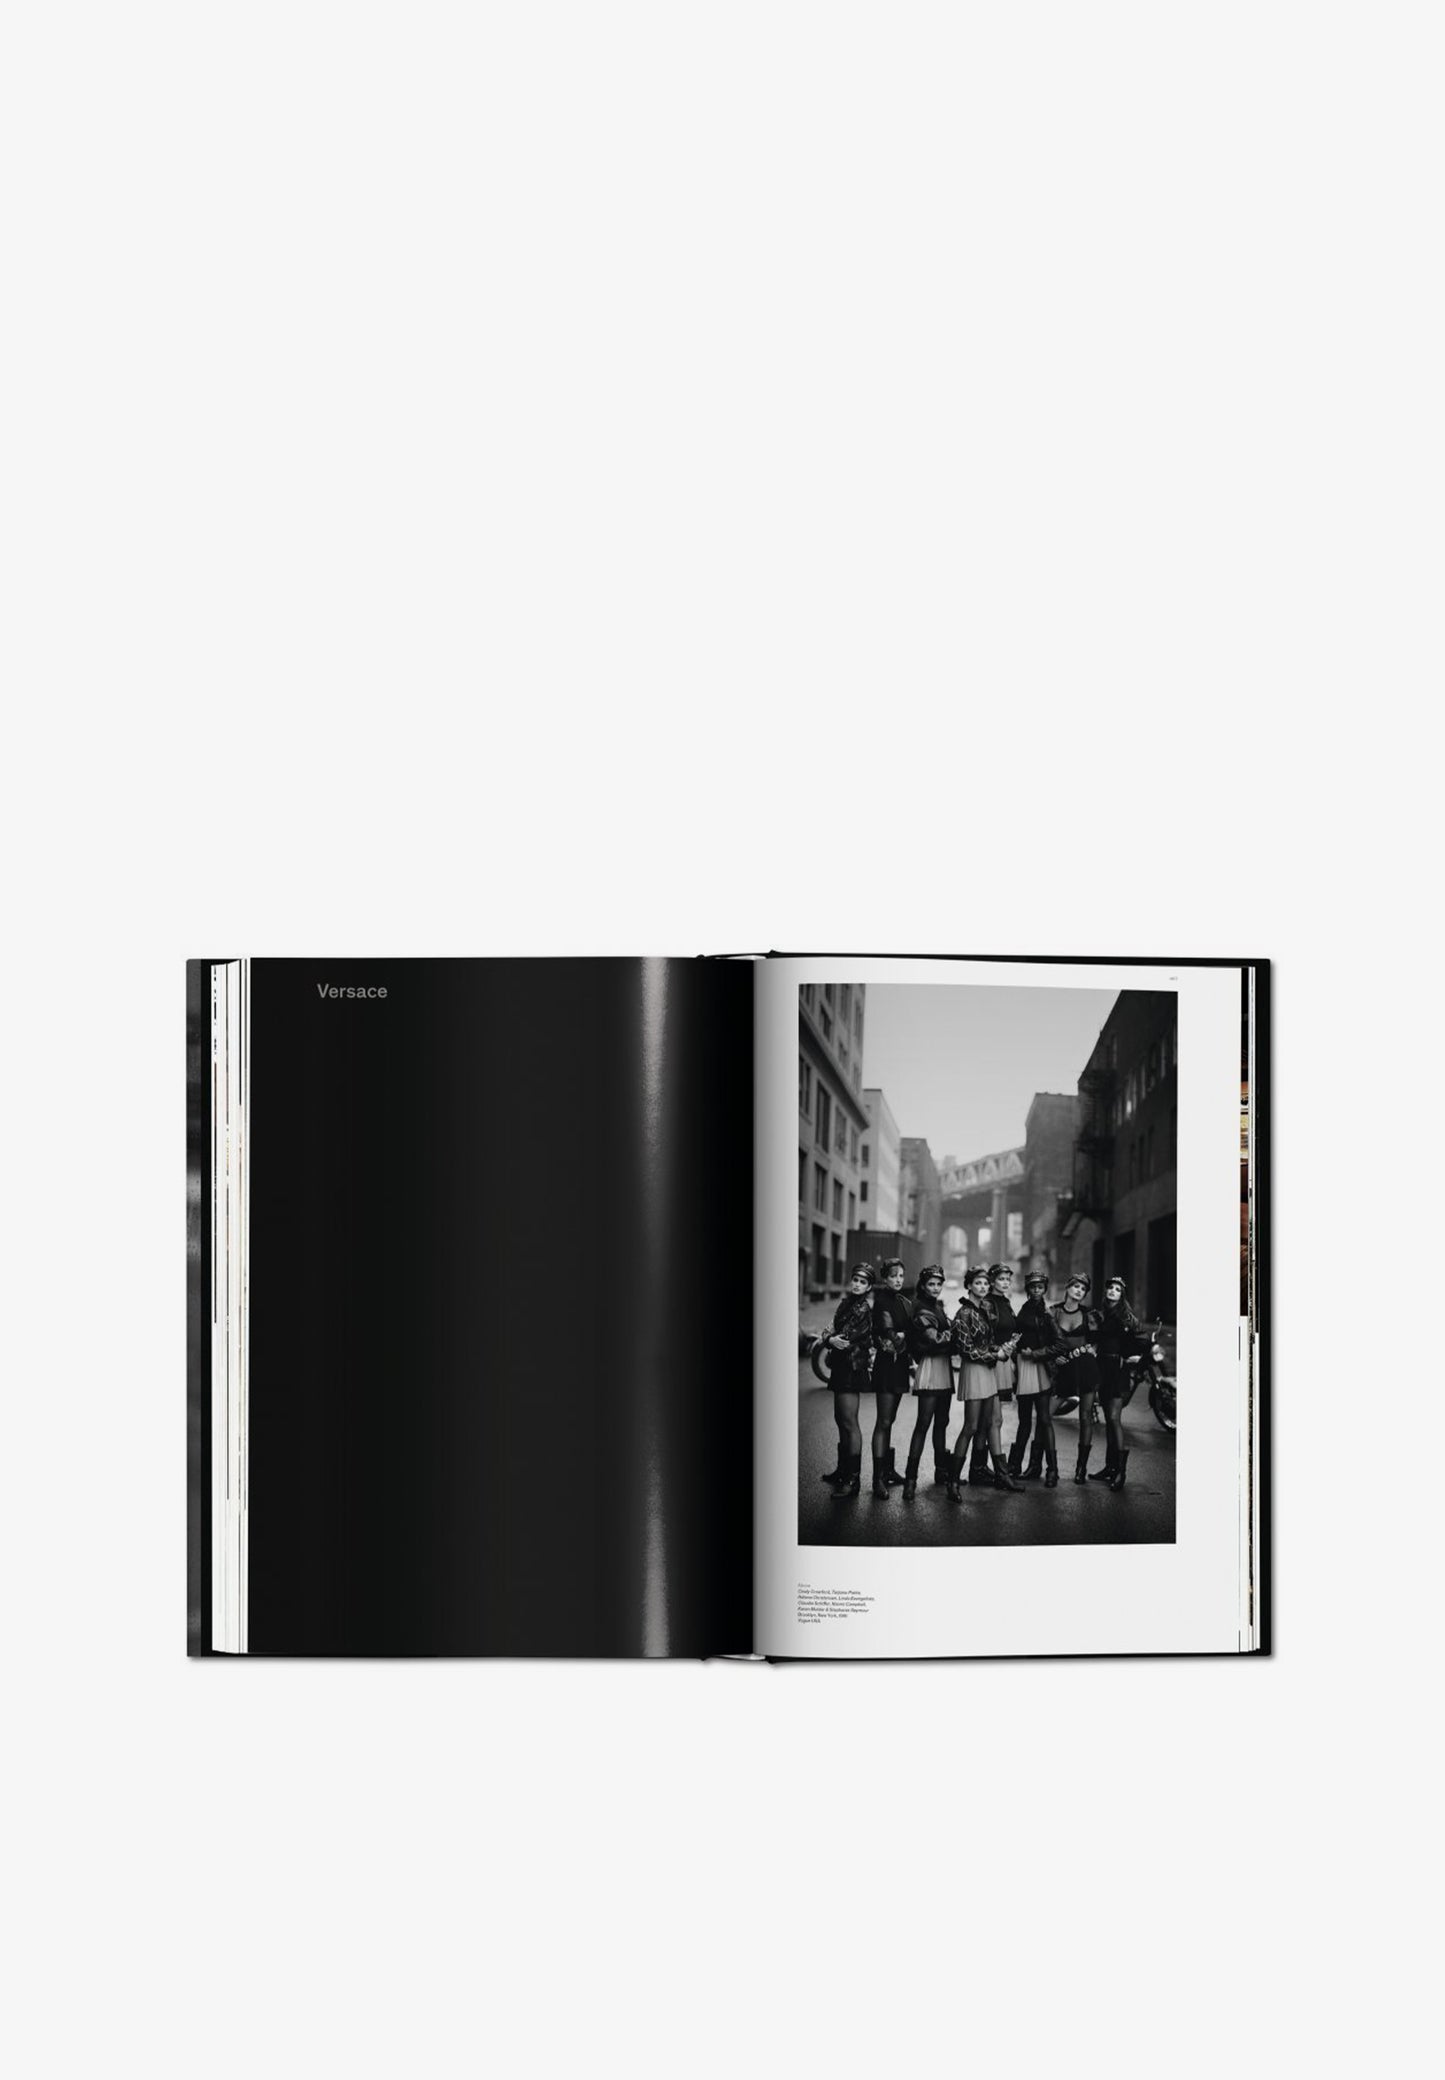 TASCHEN | LIBRO PETER LINDBERGH ON FASHION PHOTOGRAPHY